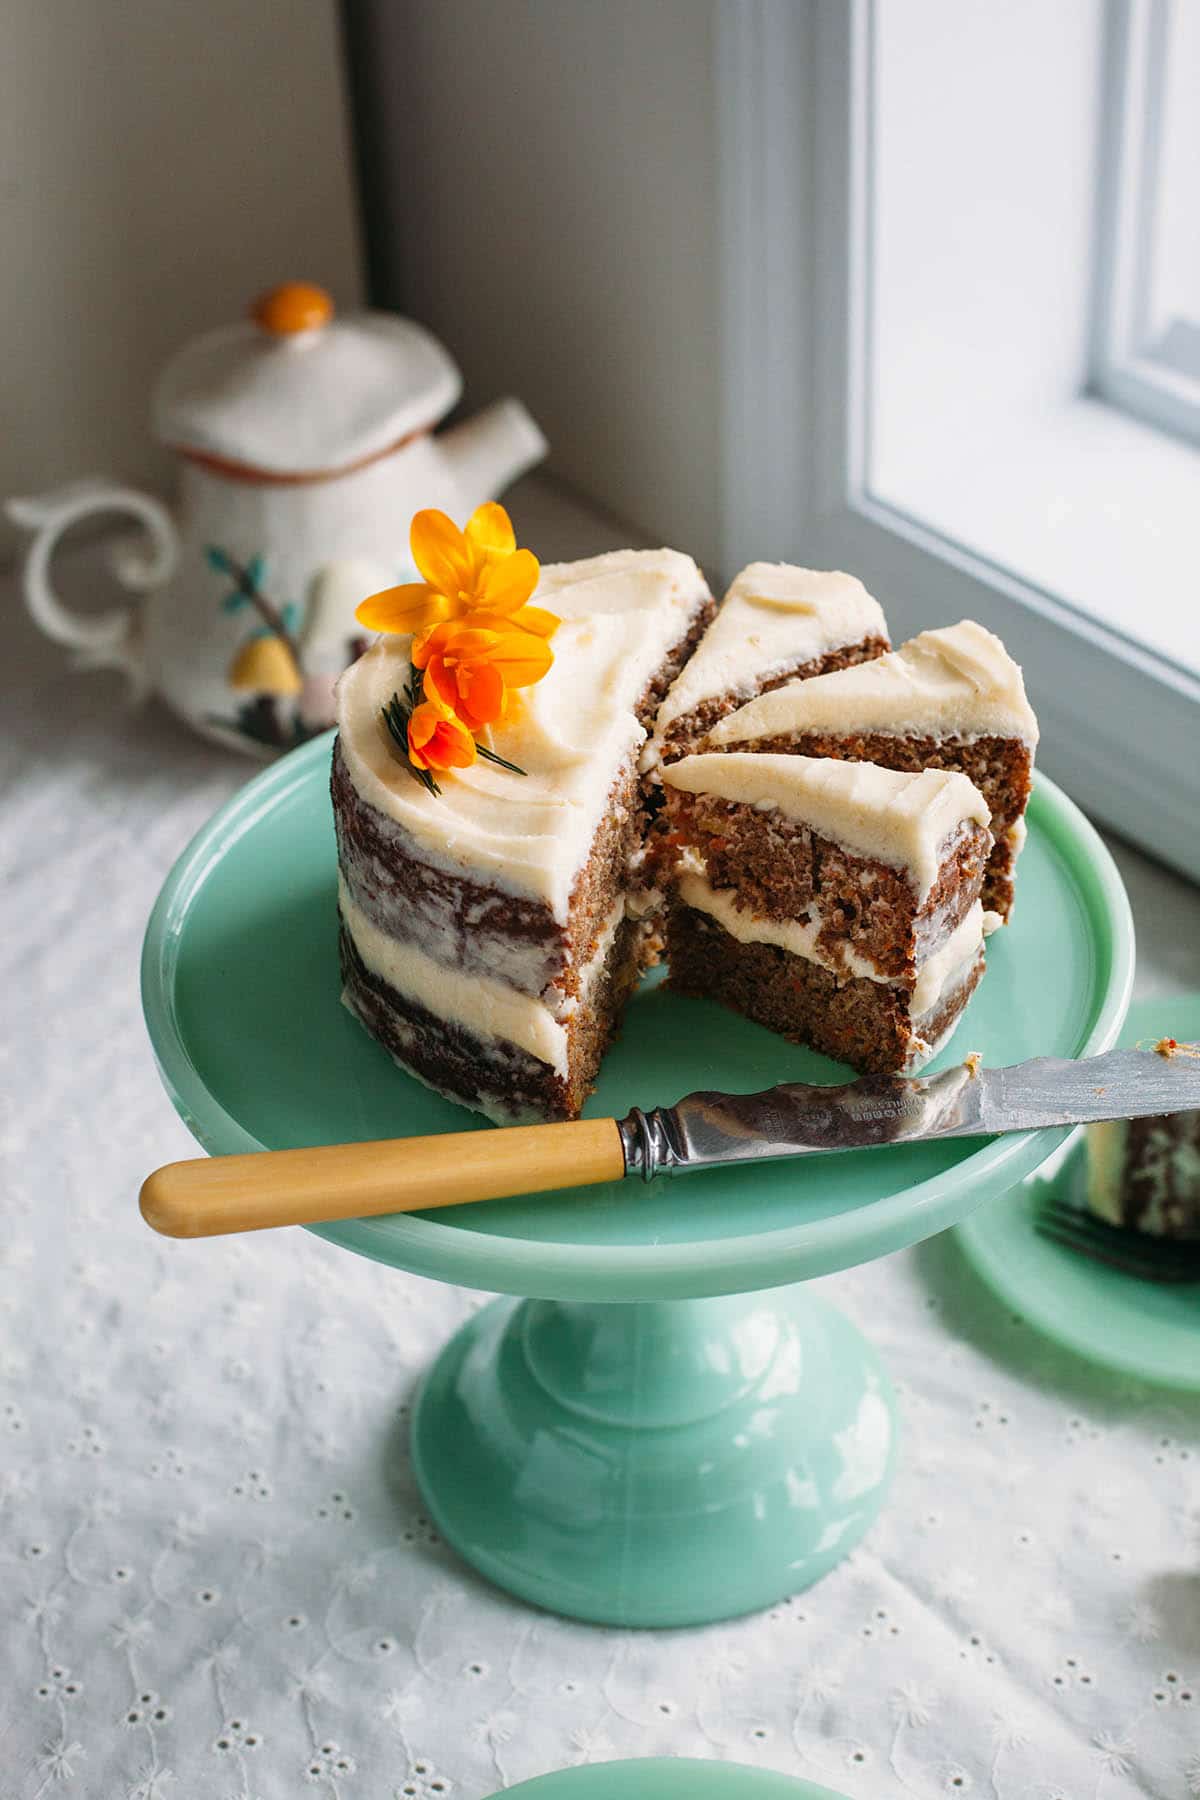 A spiced carrot cake with pineapple cut into slices on a green cake stand.